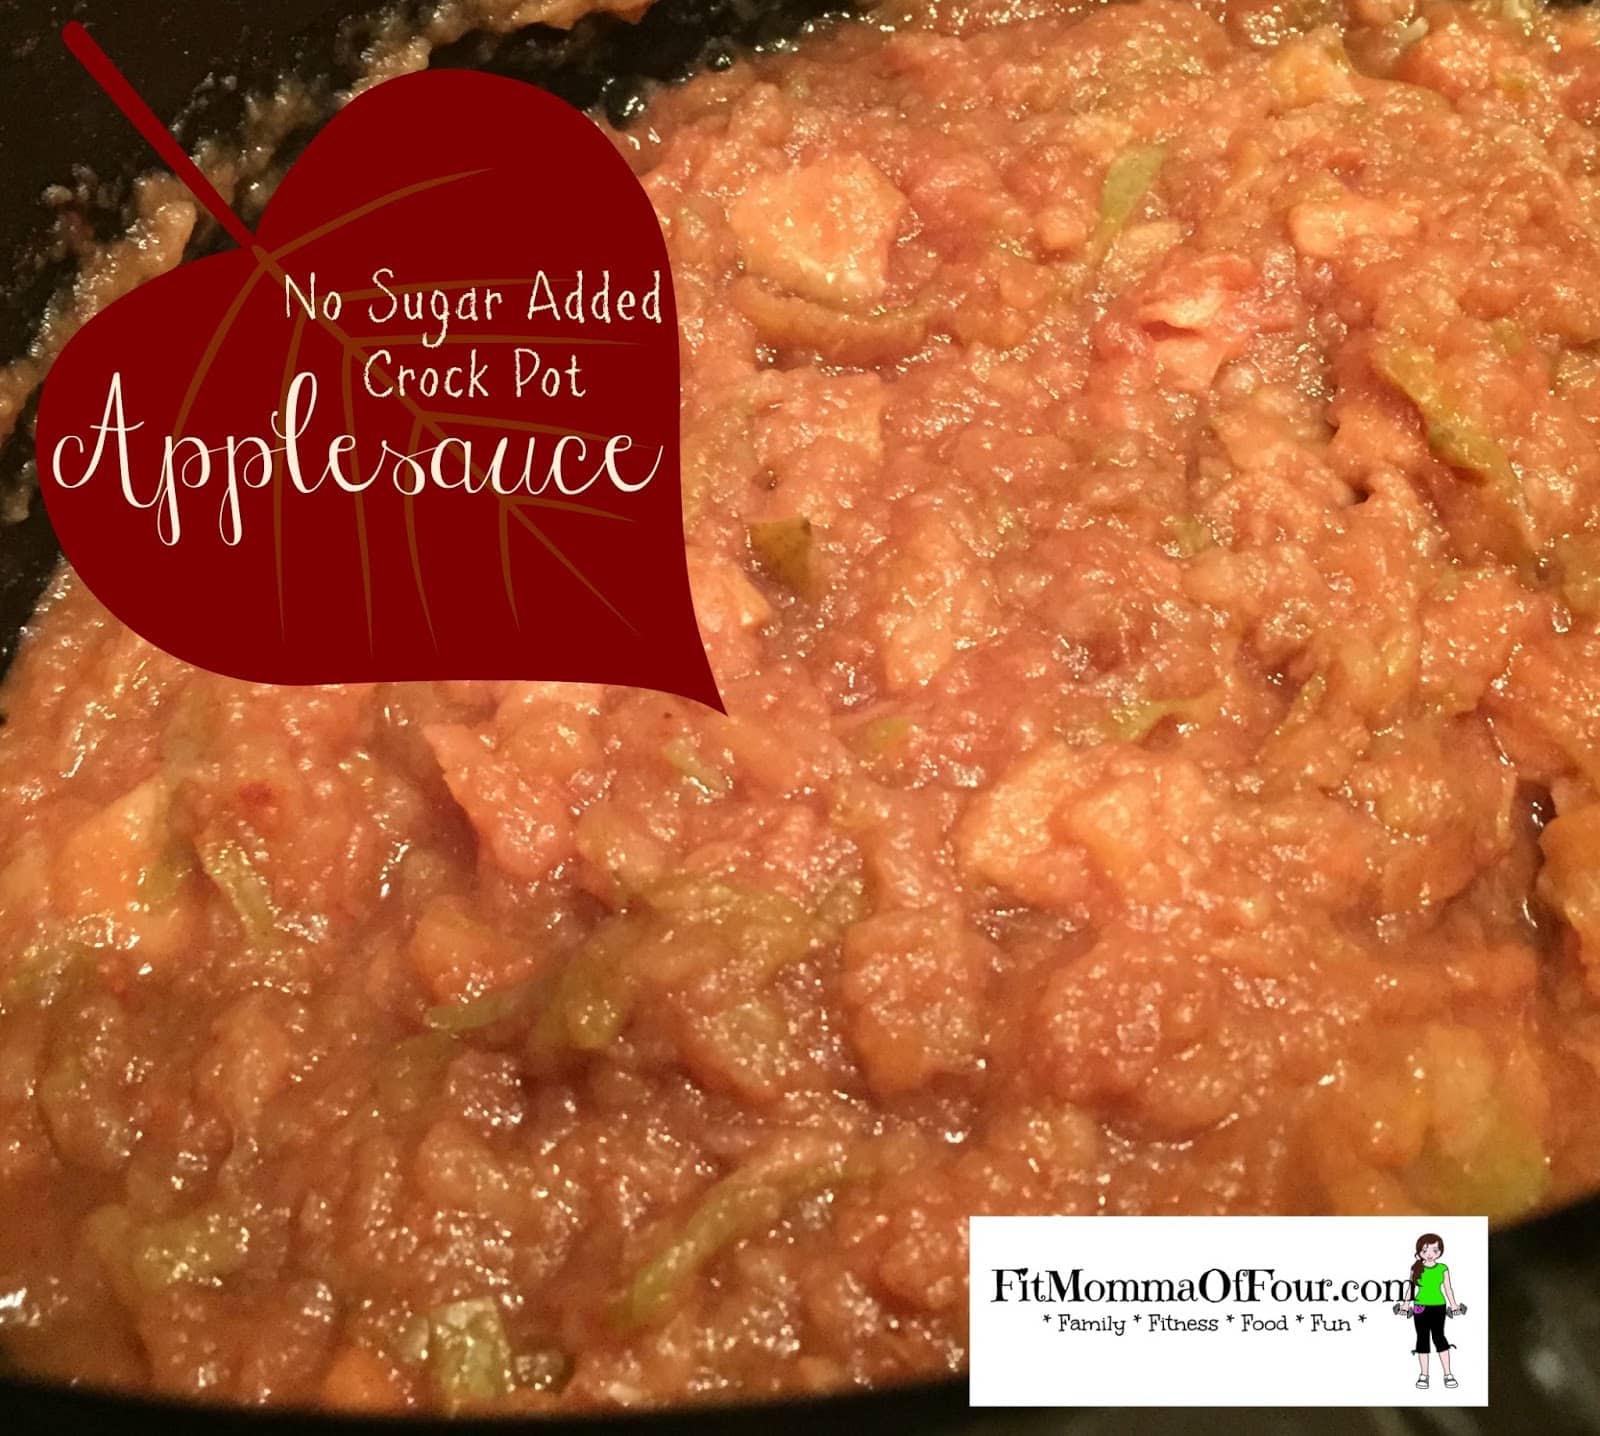 Fit Momma of Four: No Sugar Added Crock Pot Applesauce